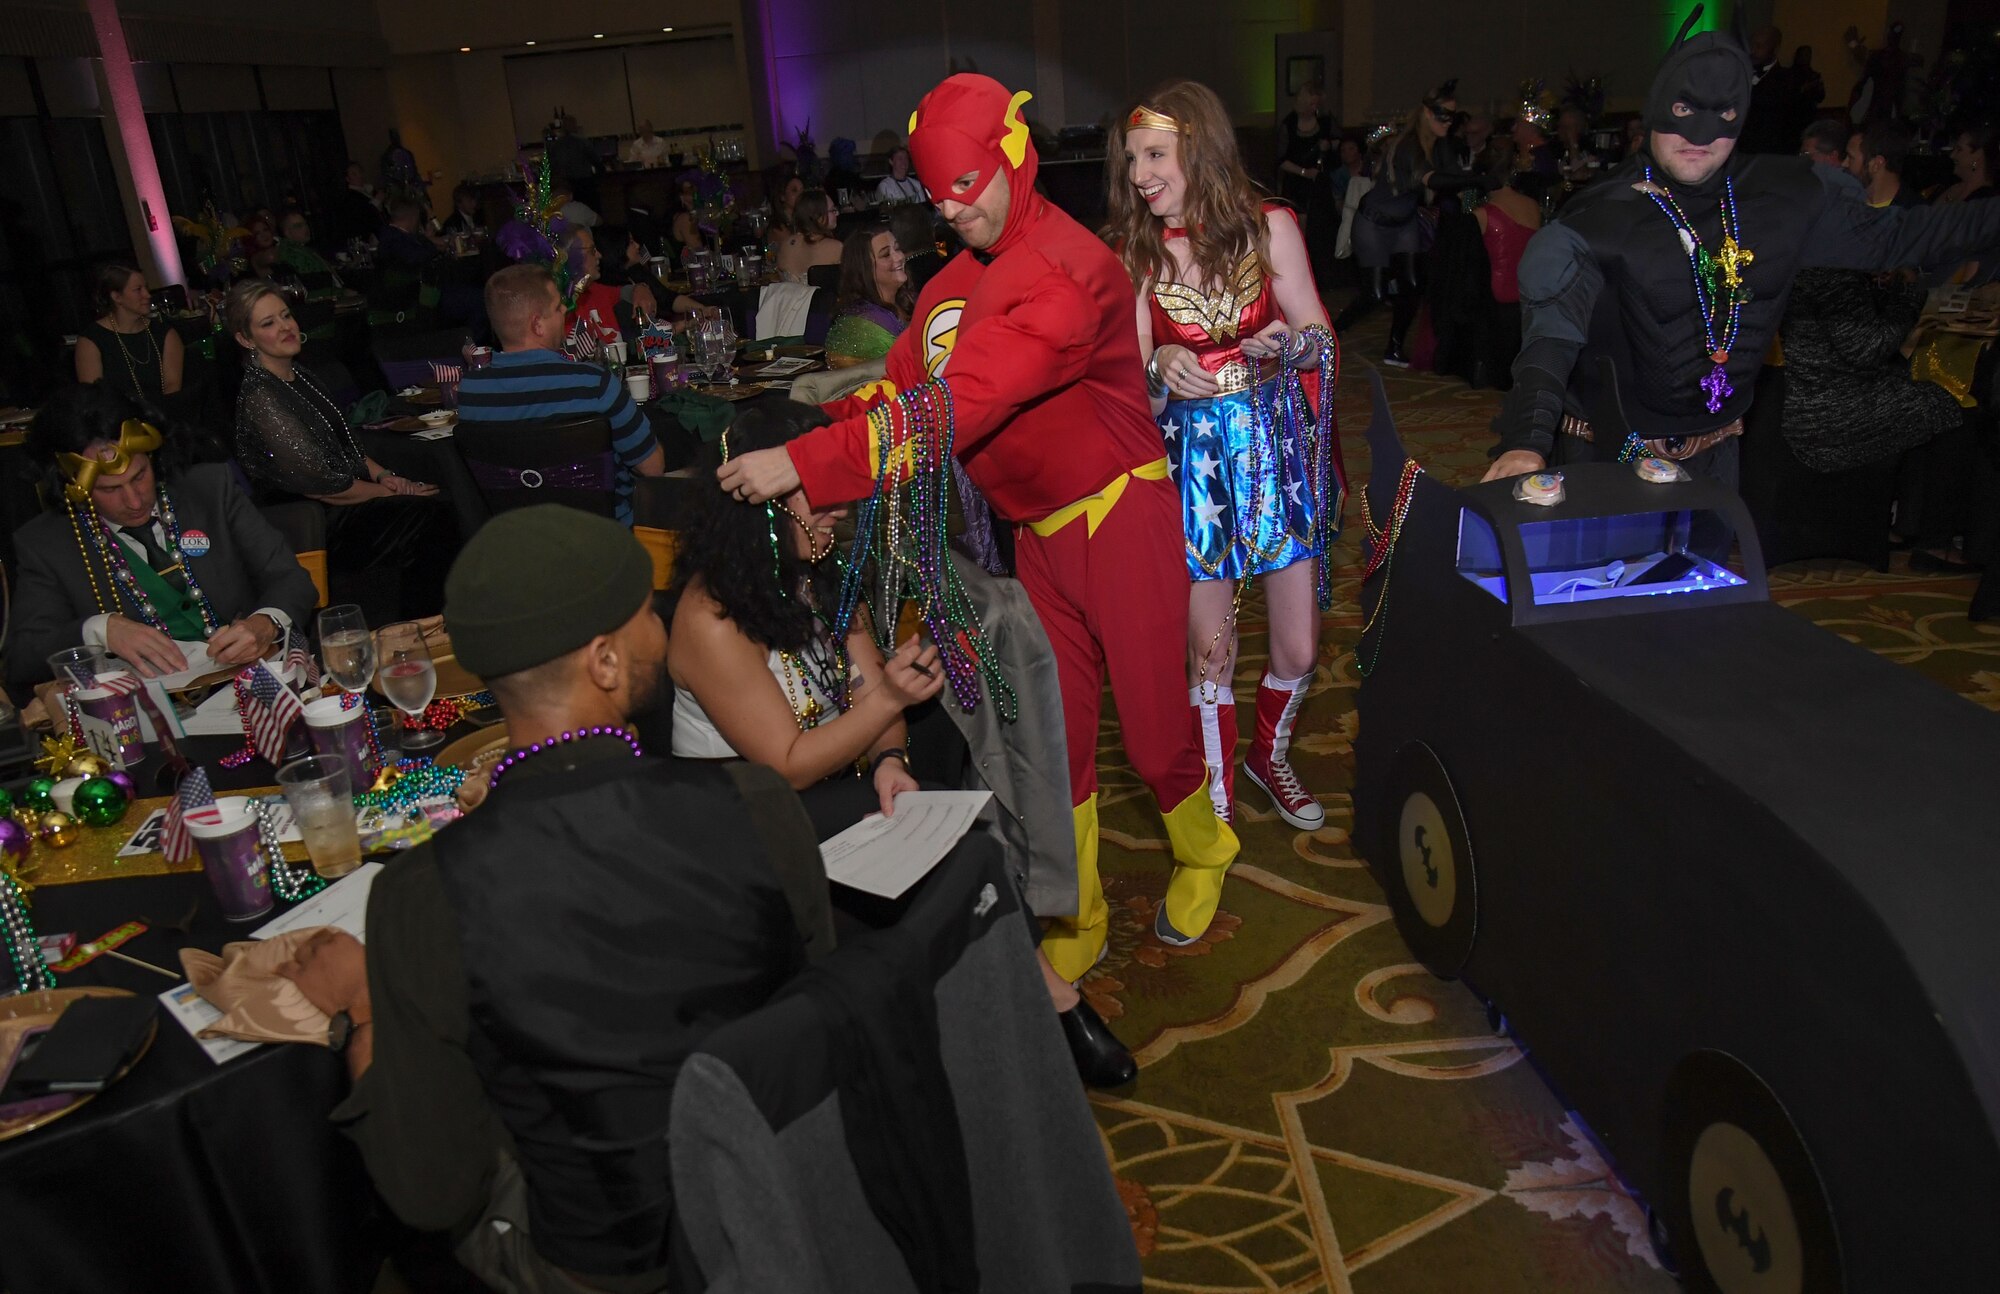 Members of the 81st Operational Medical Readiness Squadron portray DC Comics characters as they make their way down the aisle during the 32nd Annual Krewe of Medics Mardi Gras Ball at the Bay Breeze Event Center on Keesler Air Force Base, Mississippi, Feb. 11, 2023.